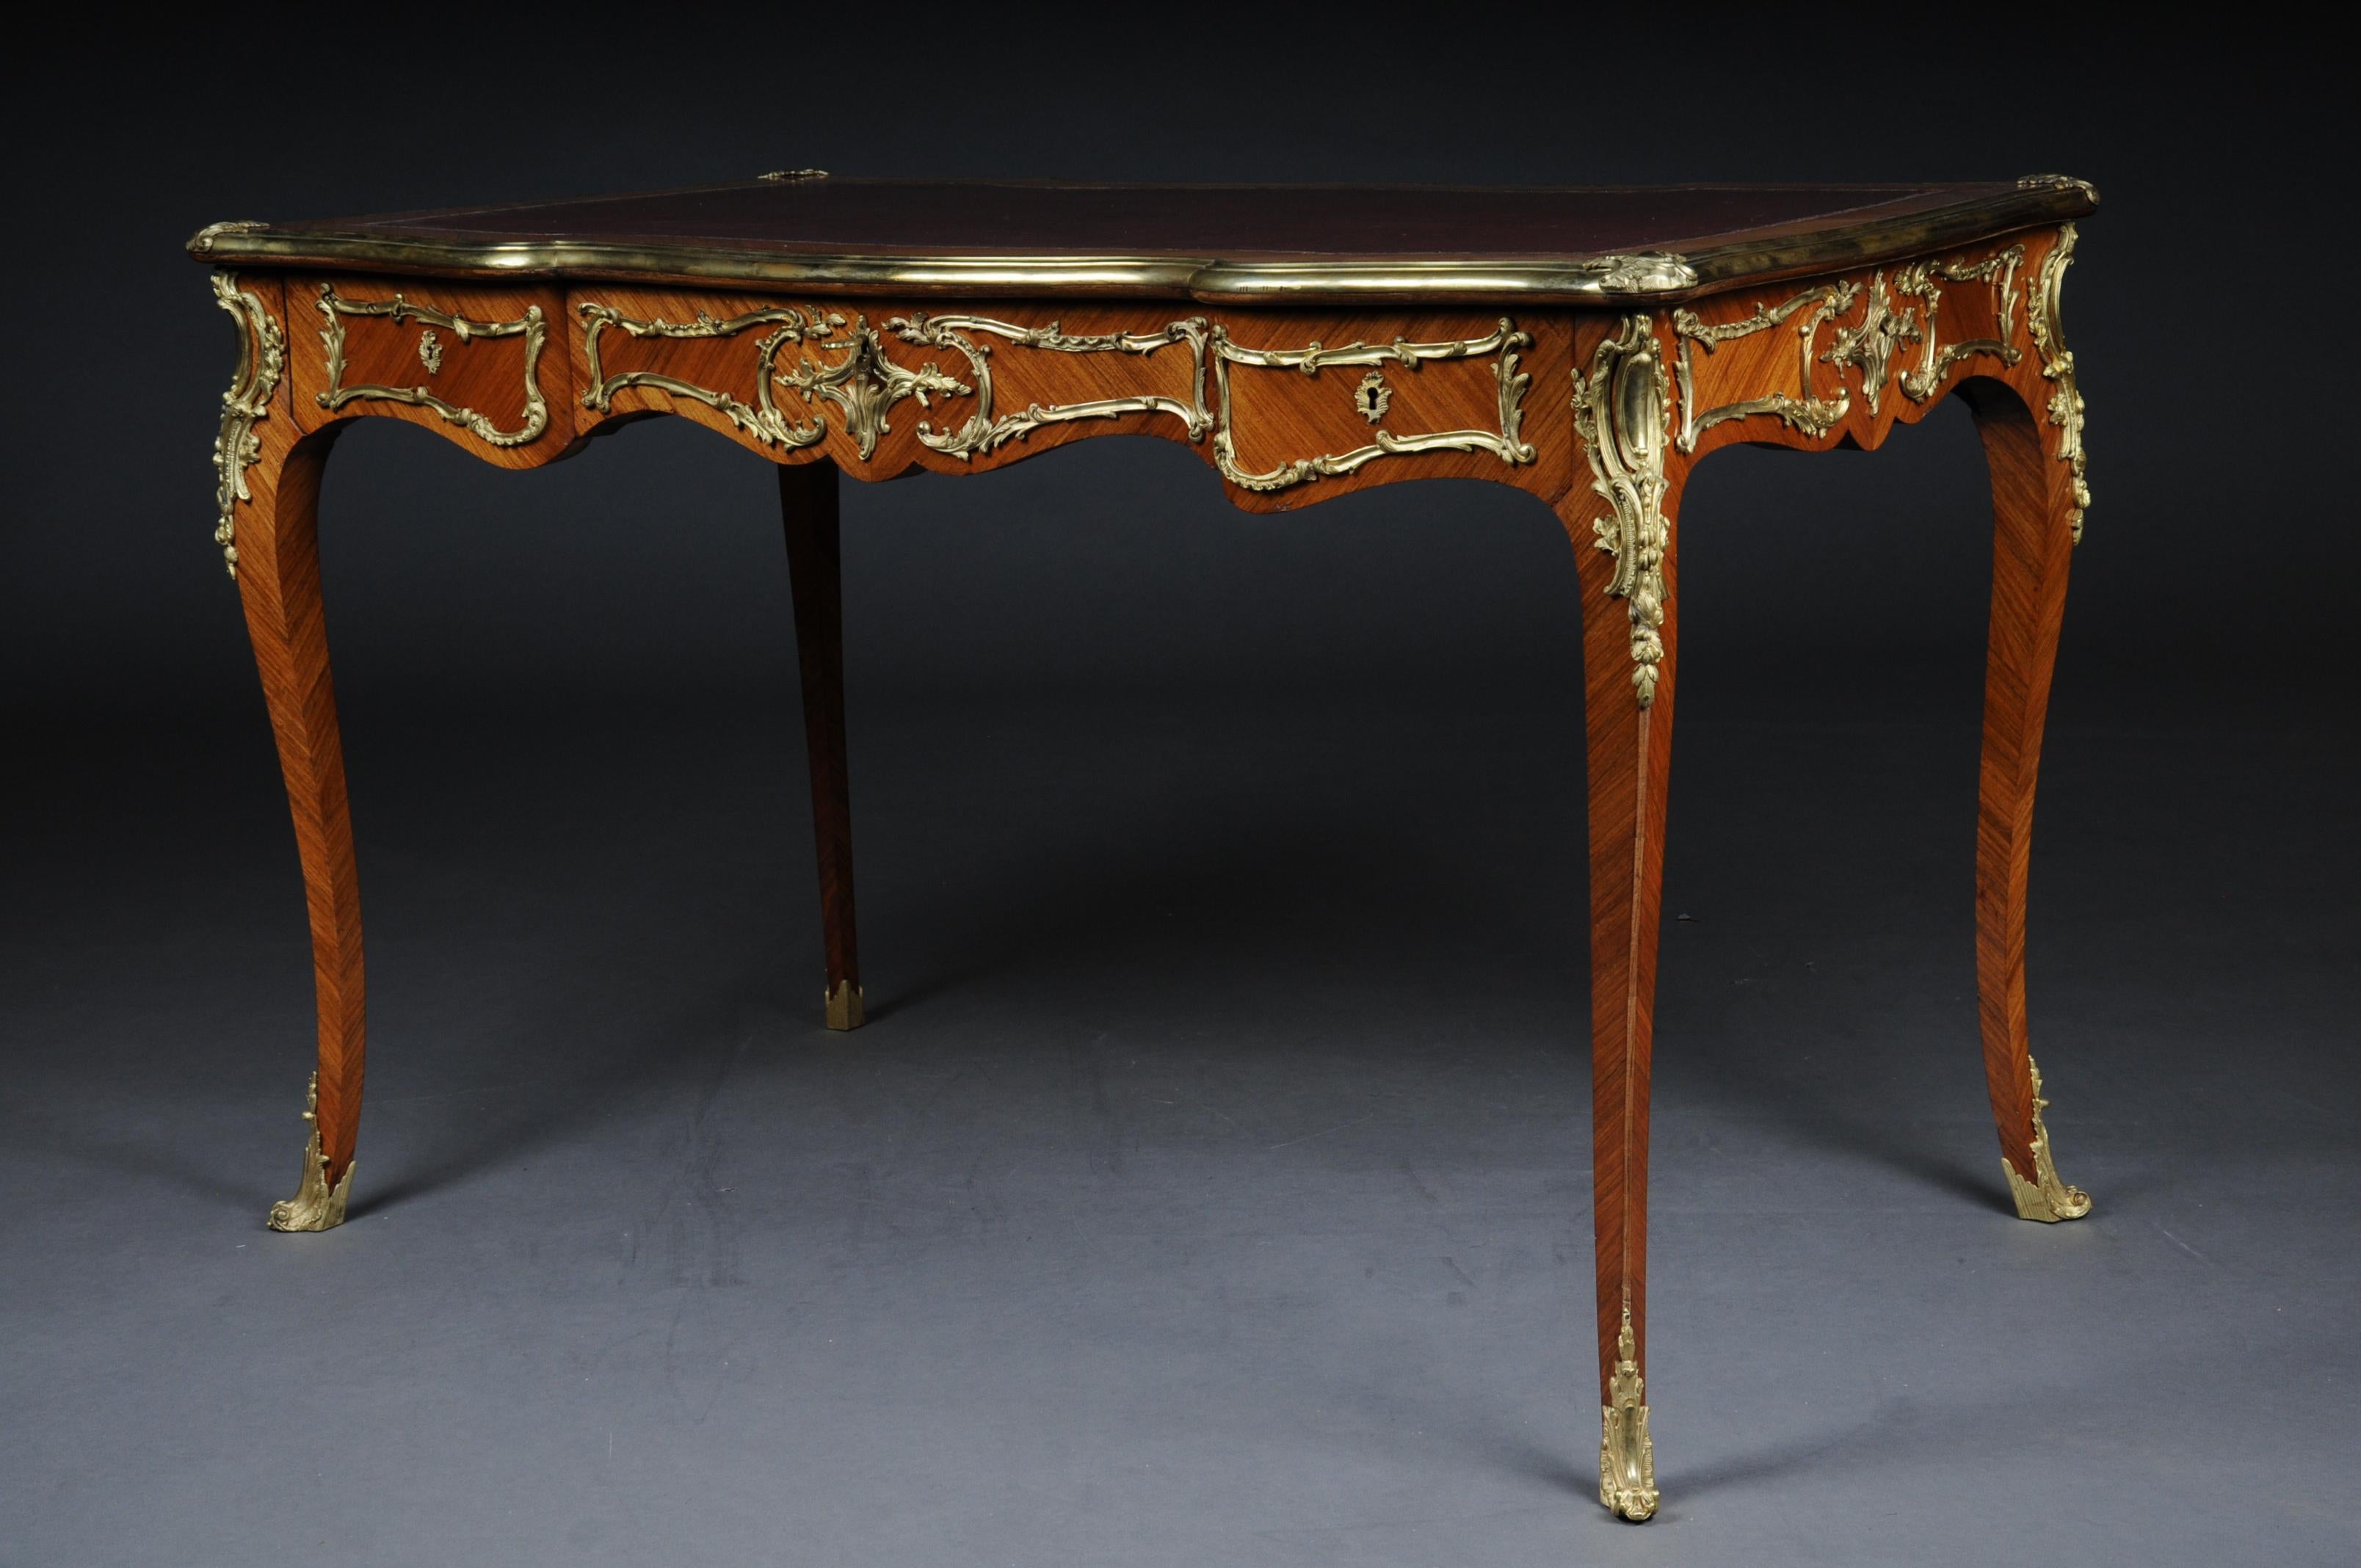 French Bureau plat / desk in Louis XV, Paris, circa 1880.

Solid beech wood veneer. Extremely fine, floral bronze fittings.
Cambered and pronounced / arched wooden body. Four-sided curved frame base.
3 drawers and a wide knee compartment on